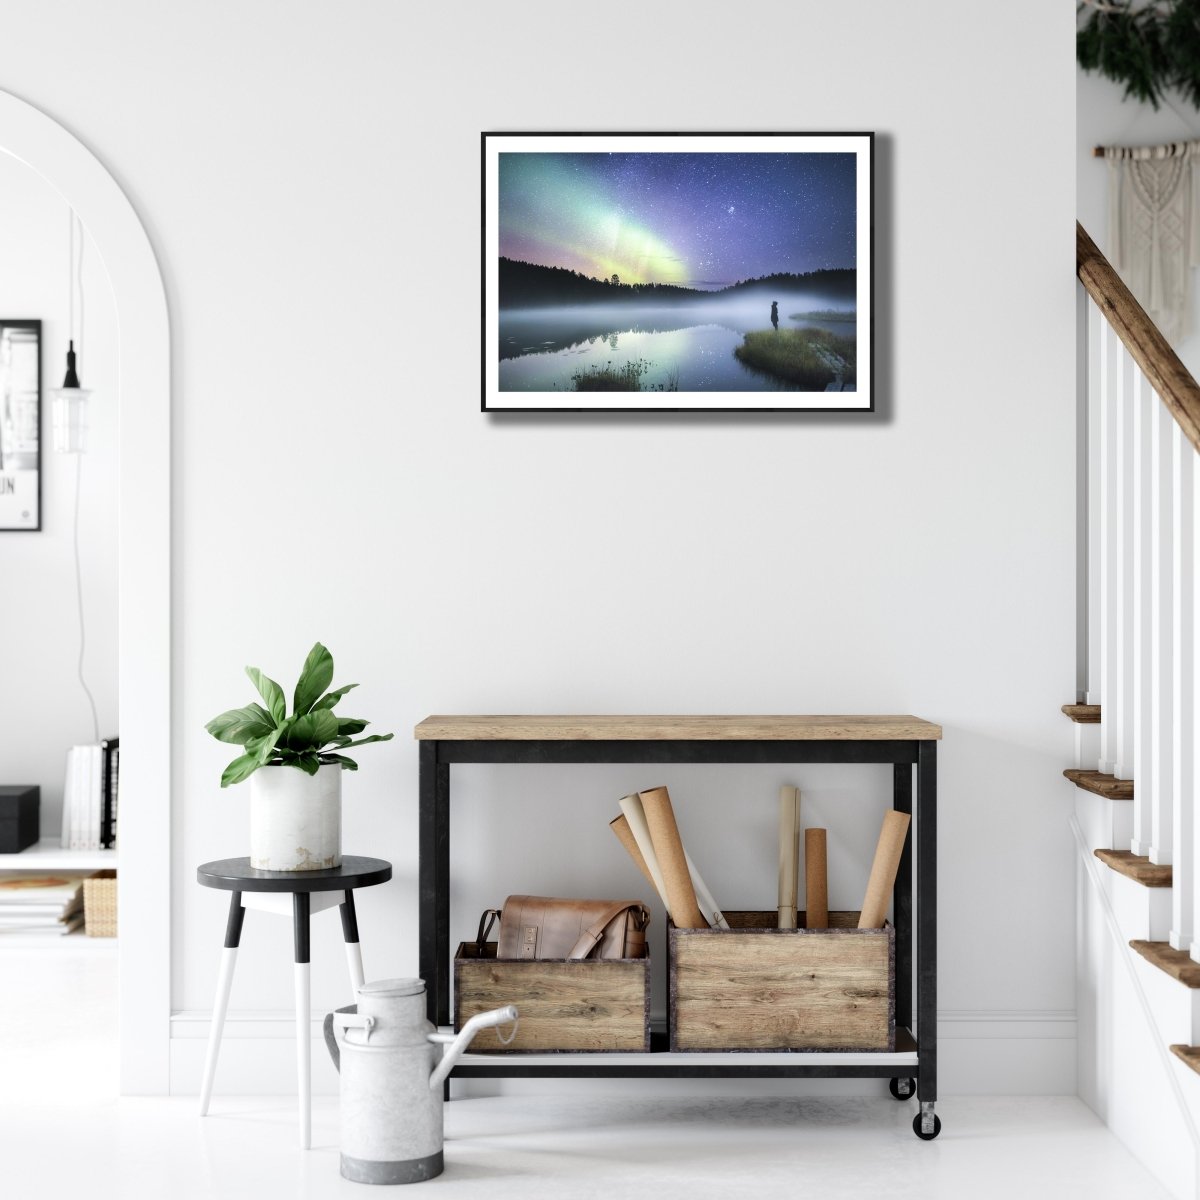 Fine art photography print of person in forest at night, reflecting Northern Lights and stars, black-framed on white wall.